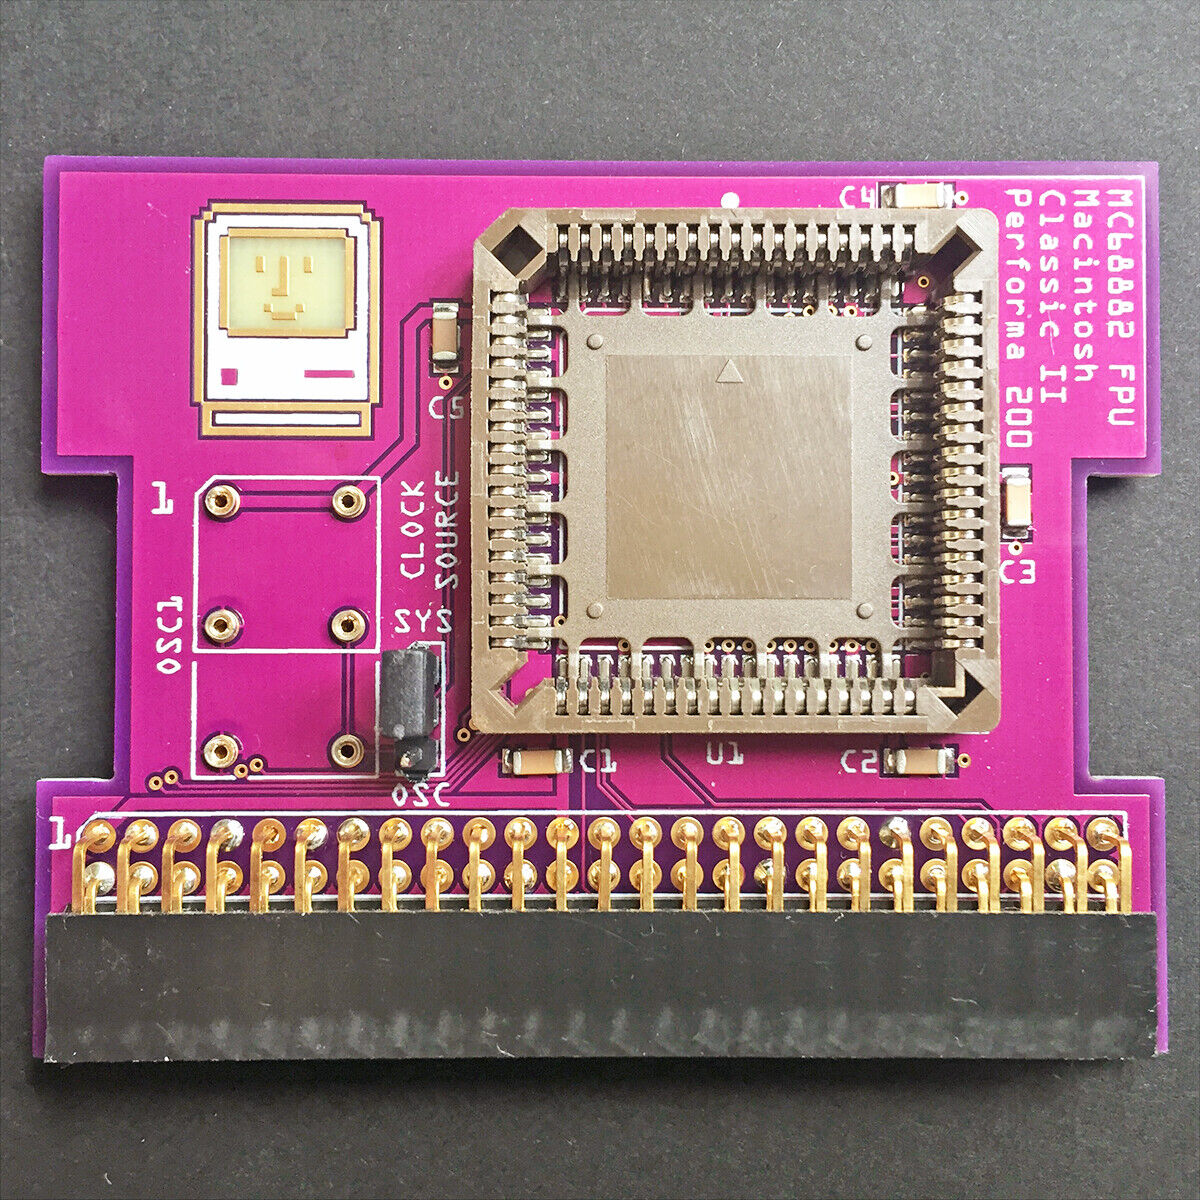 Newly made Classic II 68882 FPU coprocessor card for Apple Macintosh computers